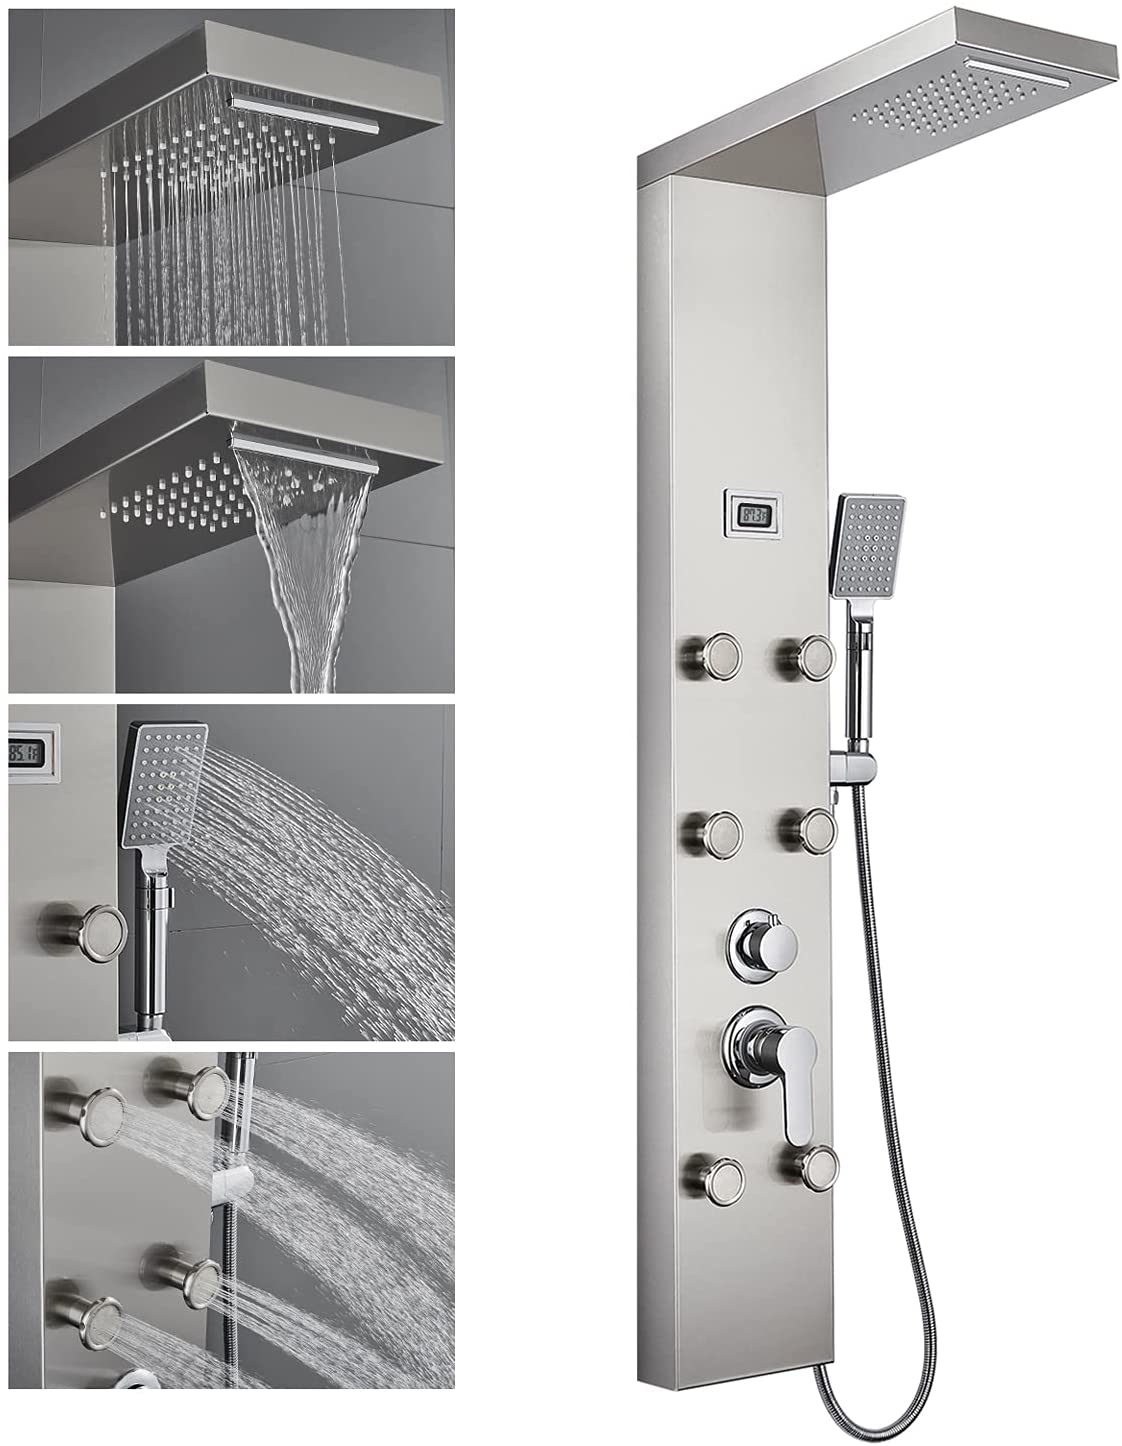 ROVOGO-6-Body-Jets-Shower-Panel-System-with-Rainfall-Waterfall-Shower-Head